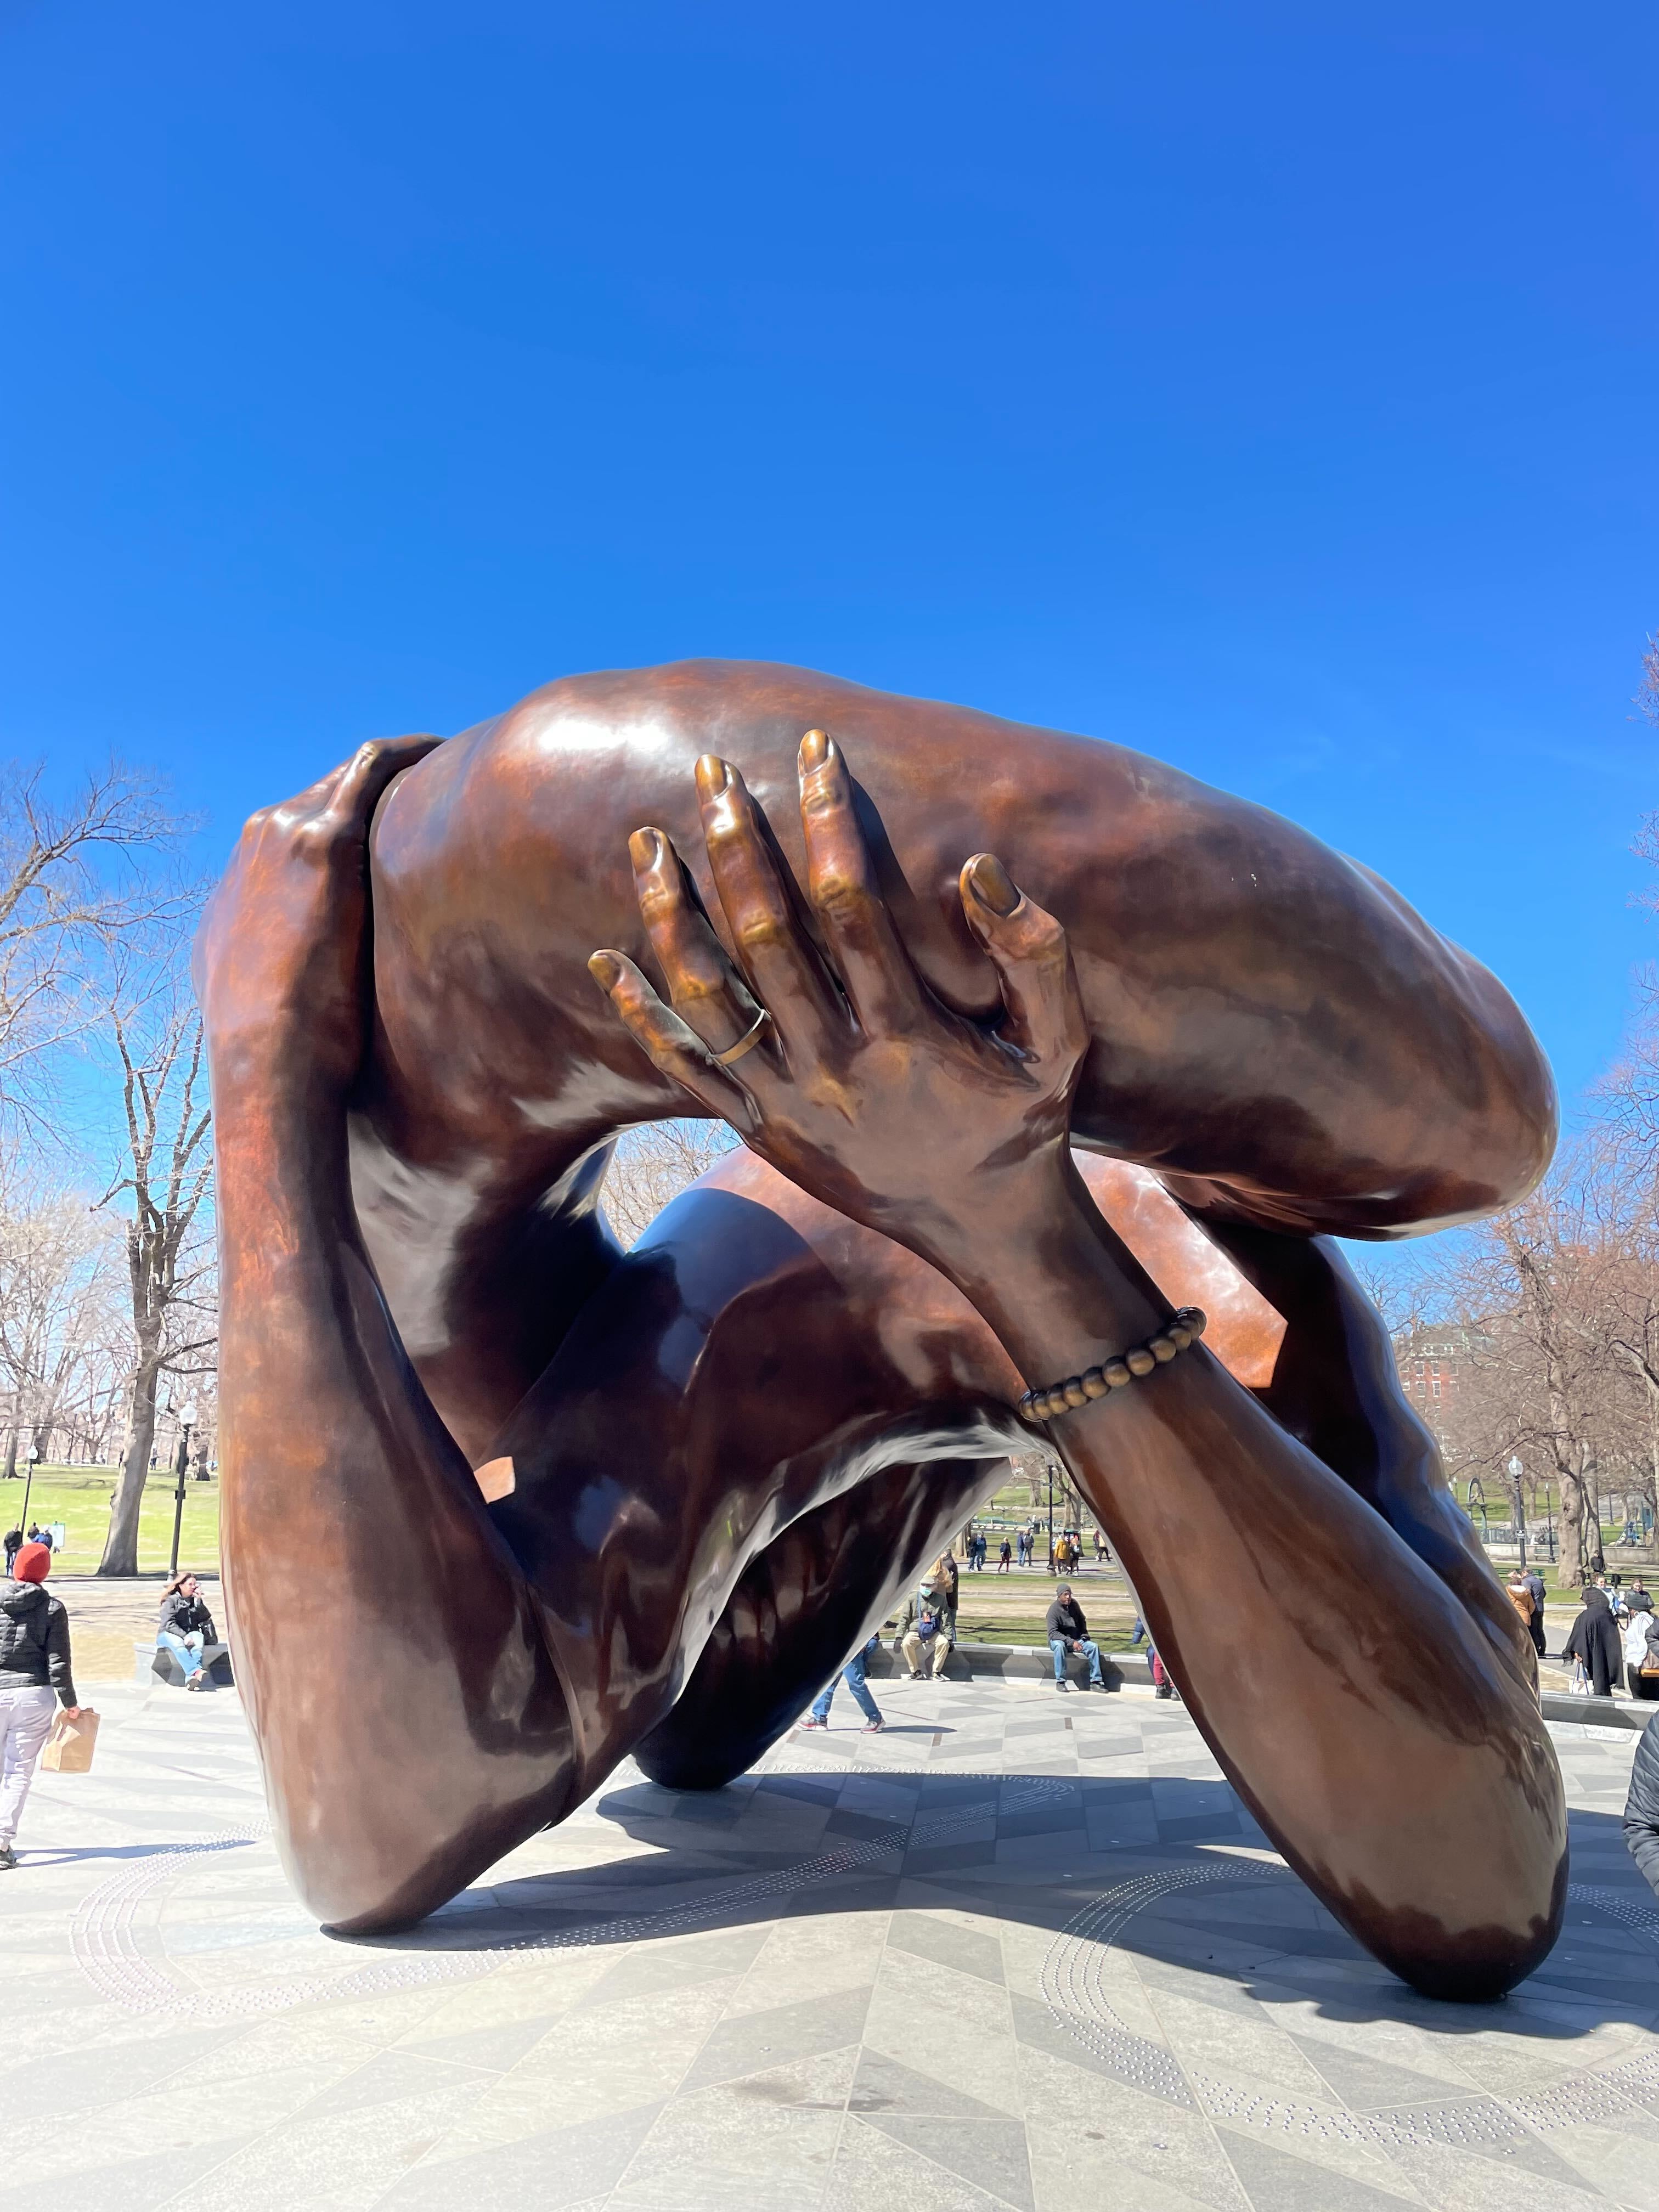 Image of the Embrace Martin Luther King Jr. memorial satatue in Boston